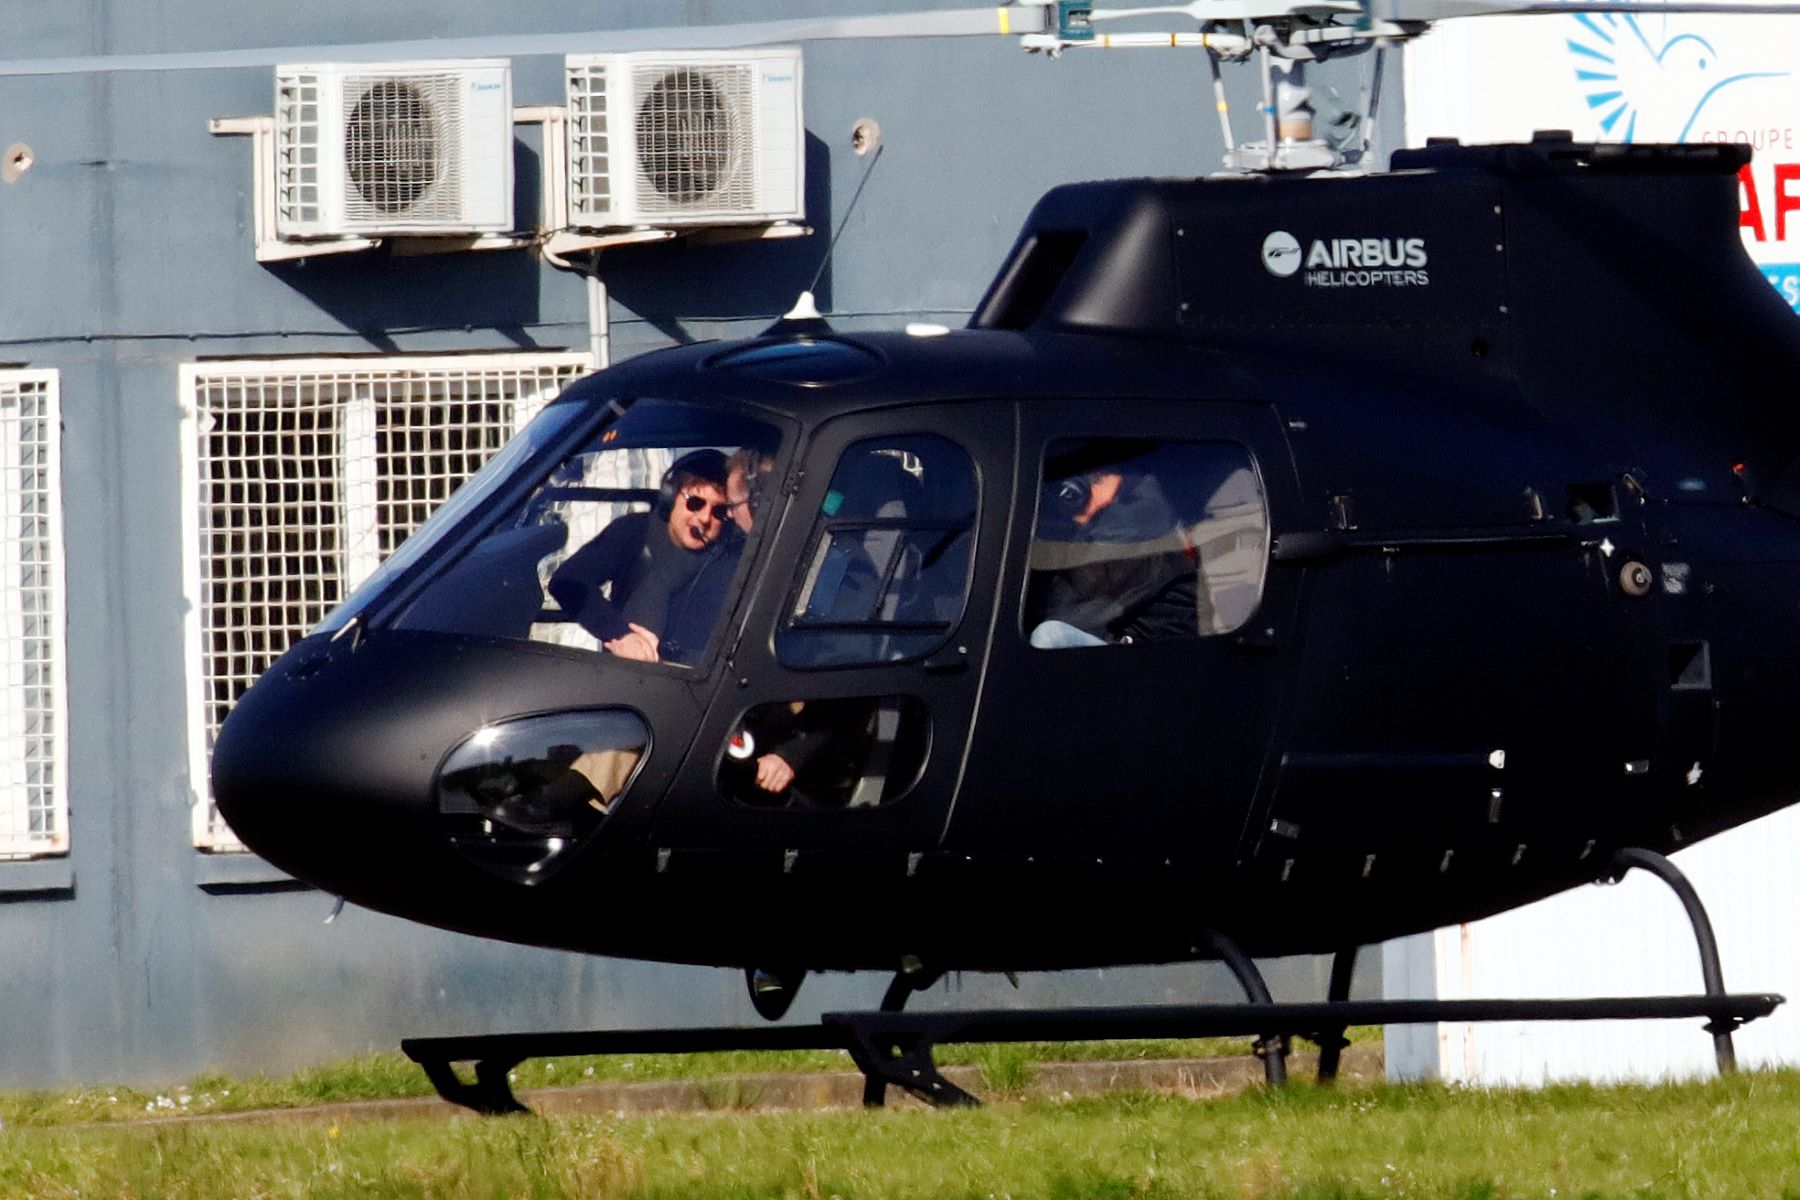 Tom Cruise in a helicopter arriving in Paris, France